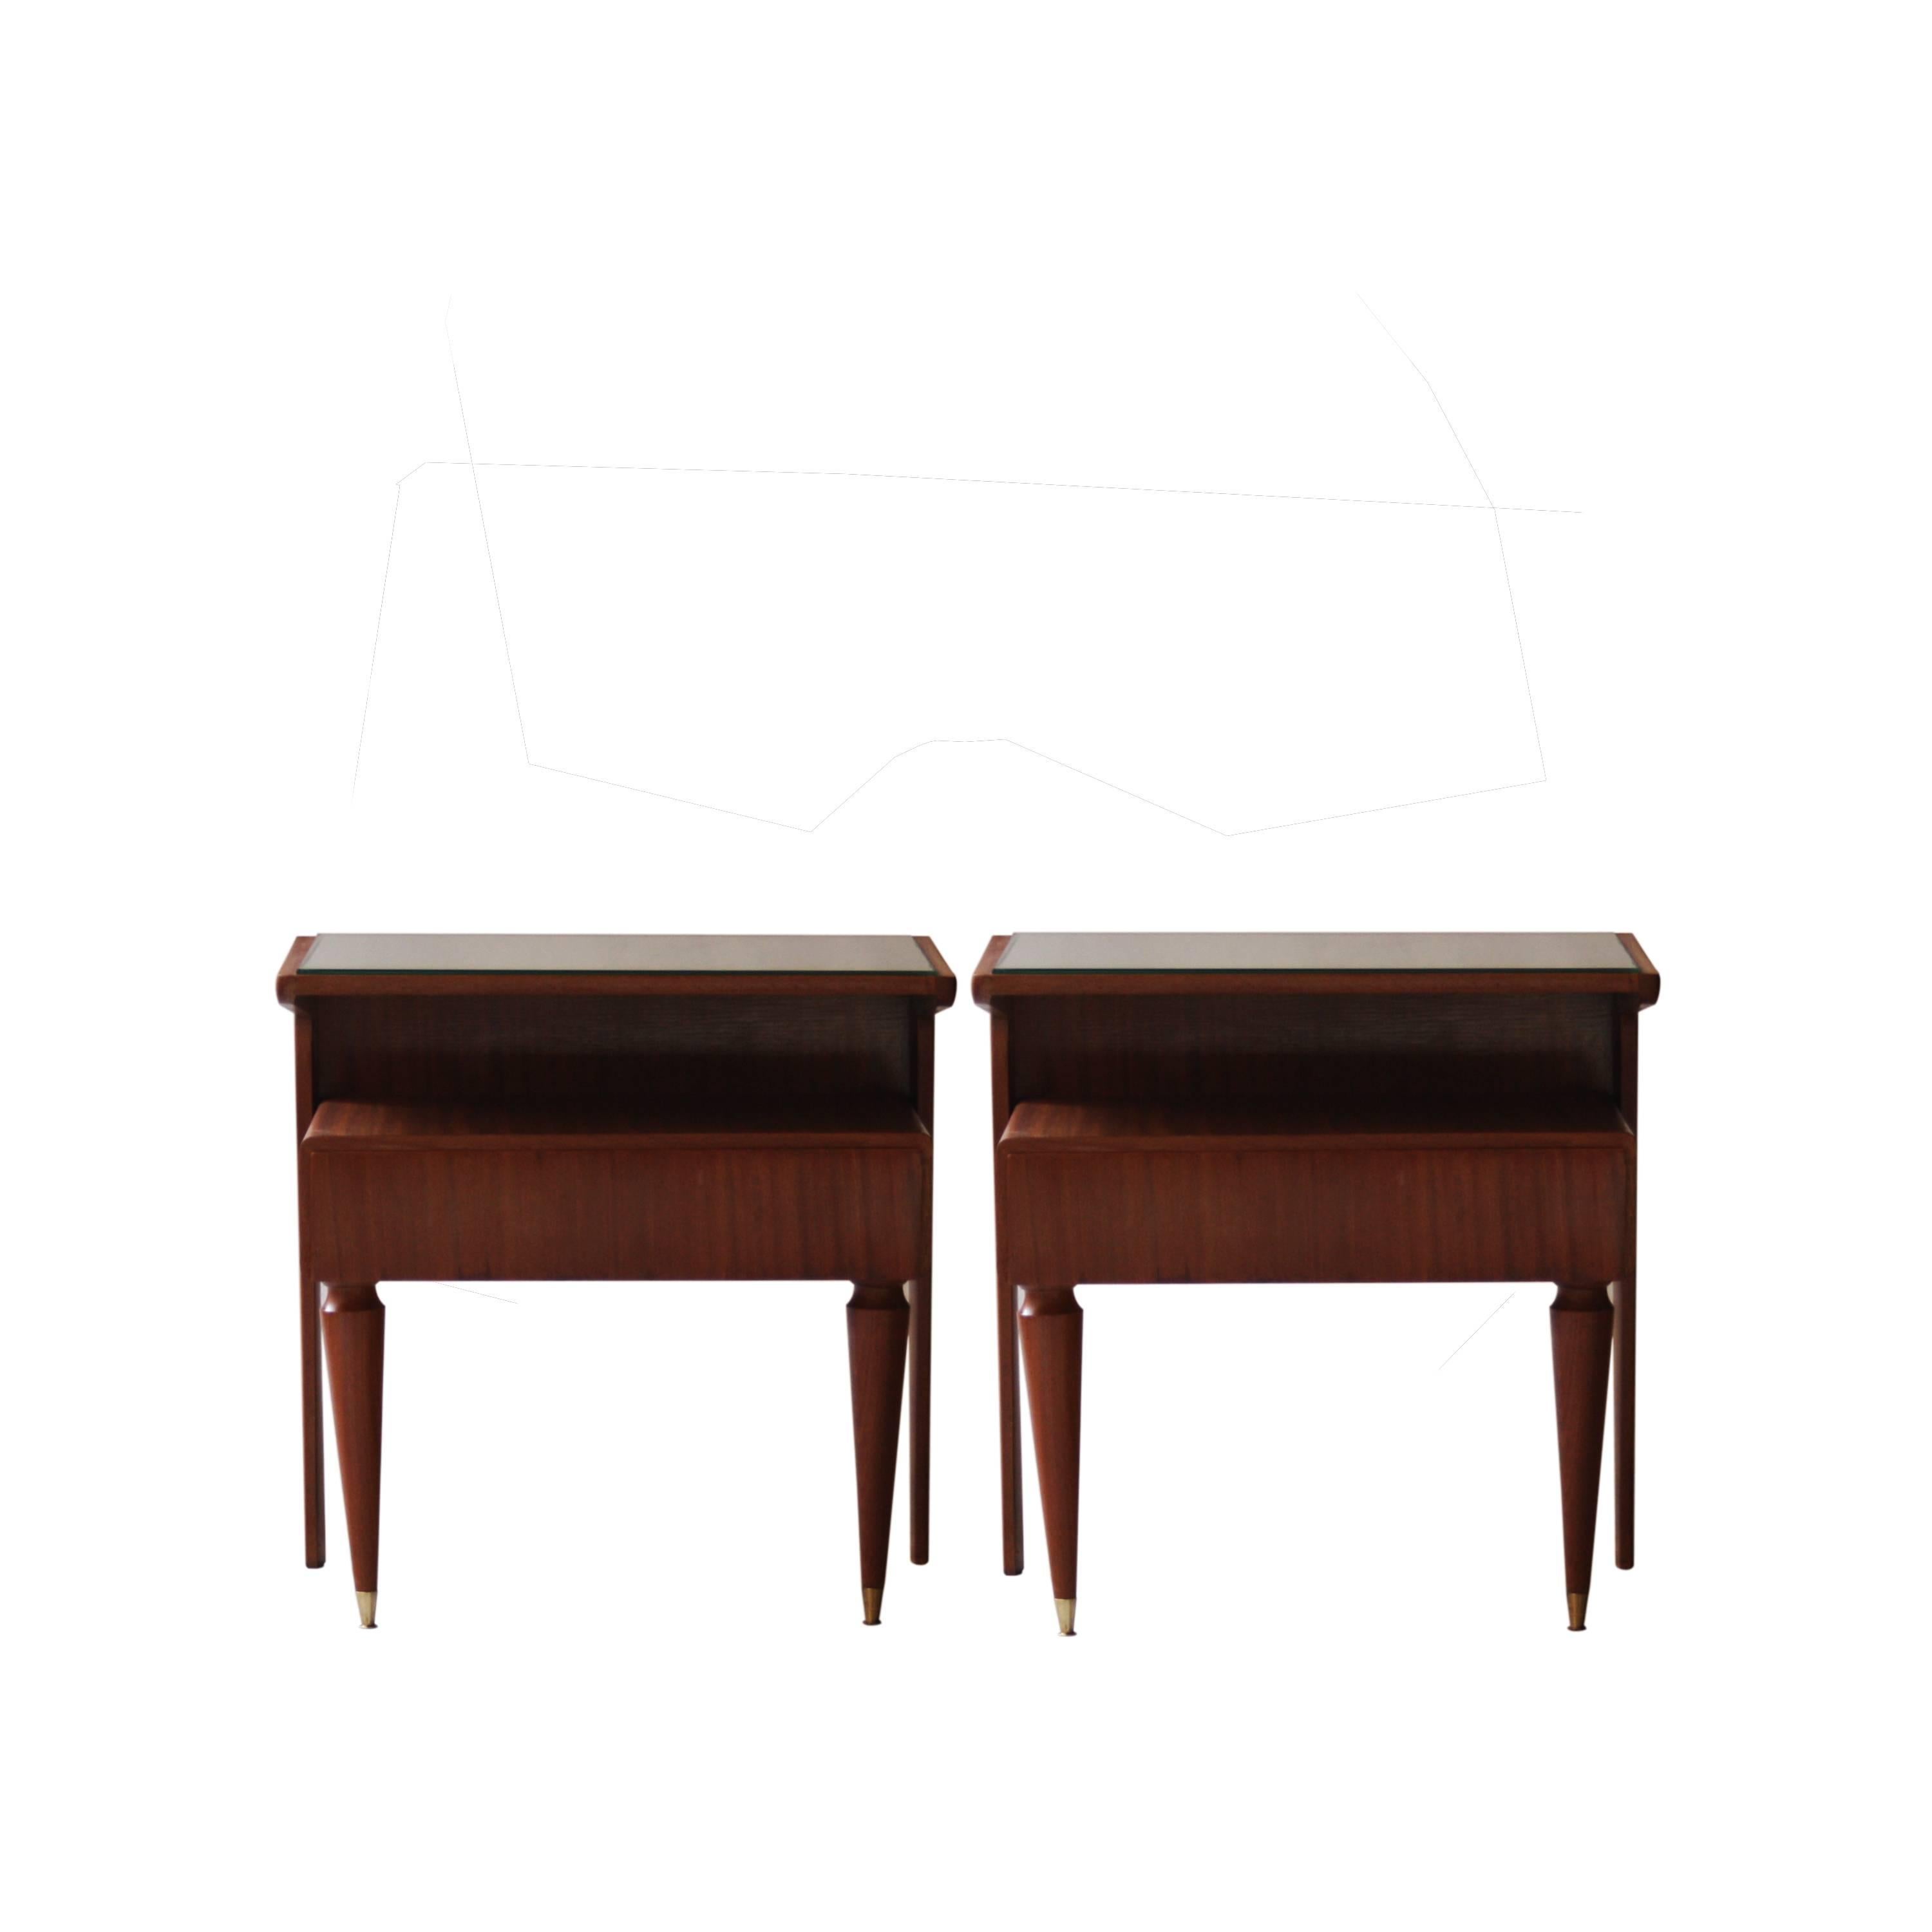 Italian Pair of Night Tables Made of Rosewood, Italy, 1950